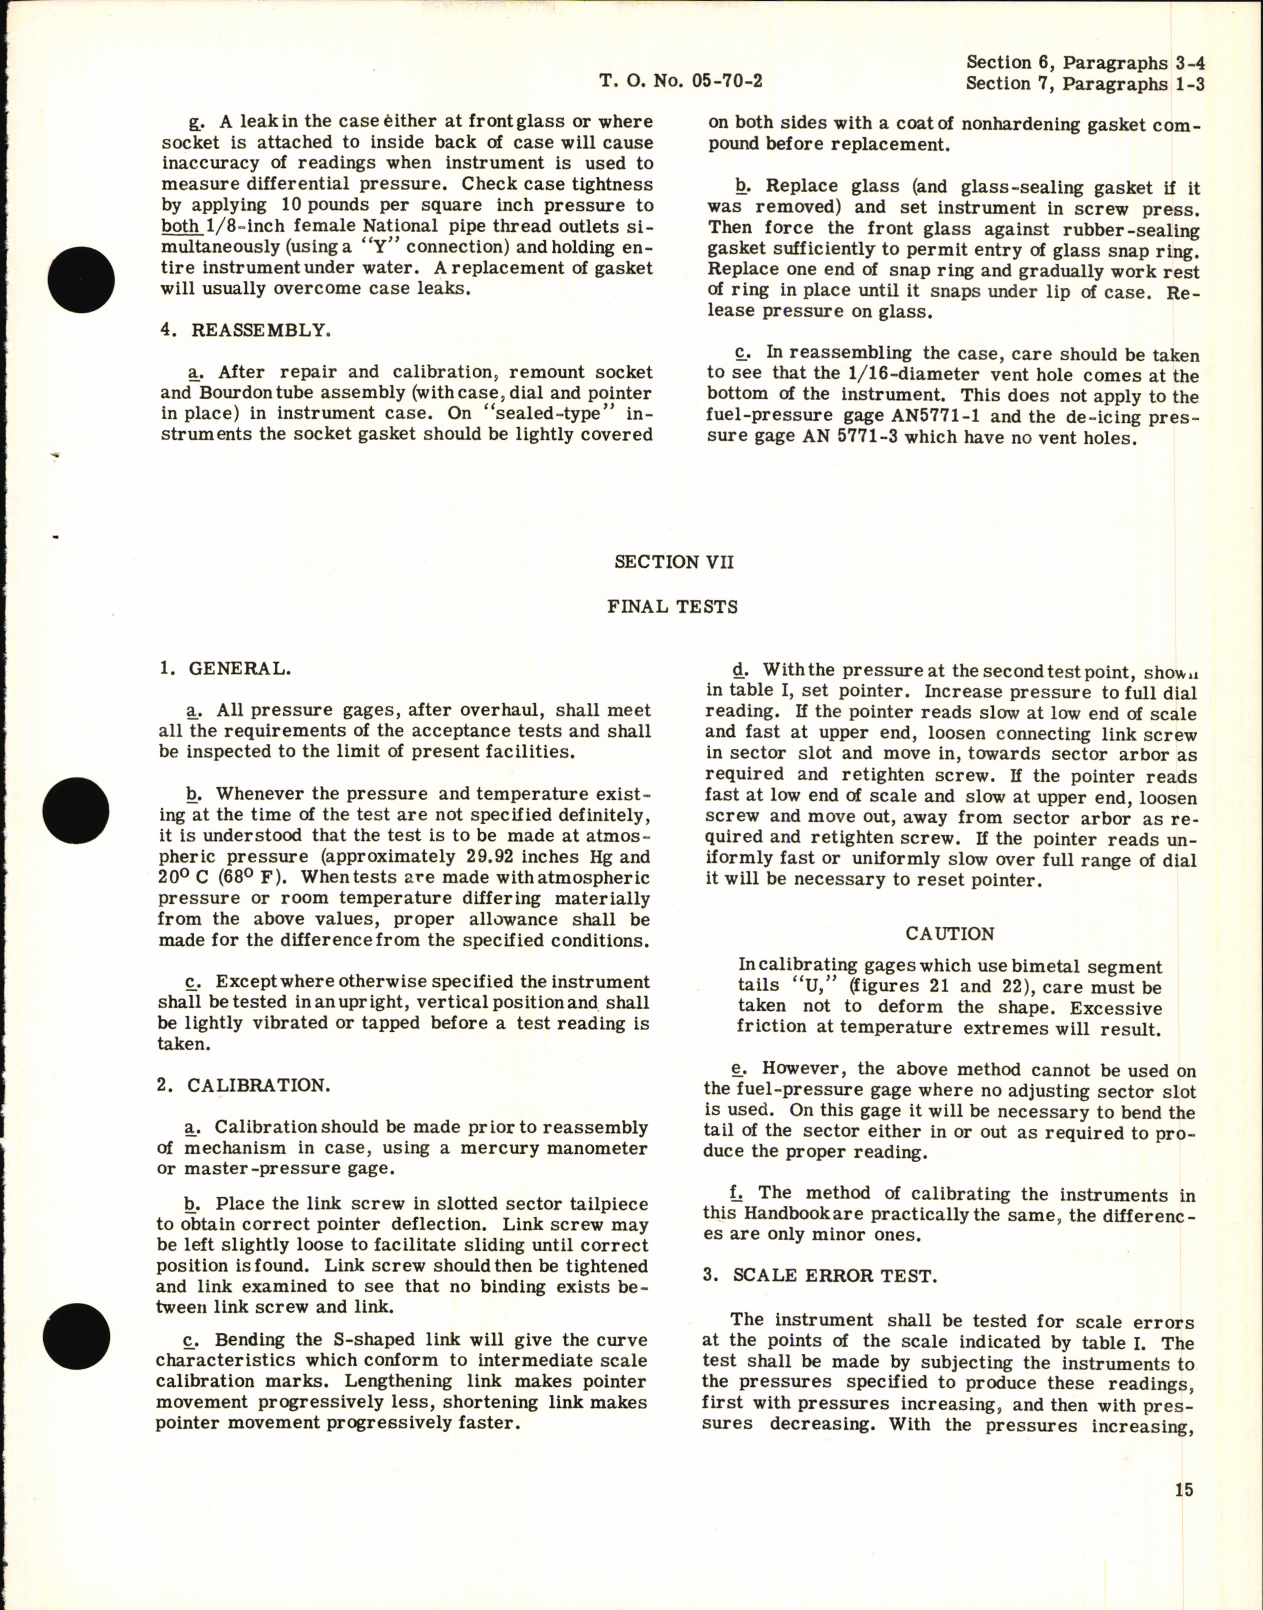 Sample page 7 from AirCorps Library document: Operation, Service, & Overhaul Instructions for Pressure Gages